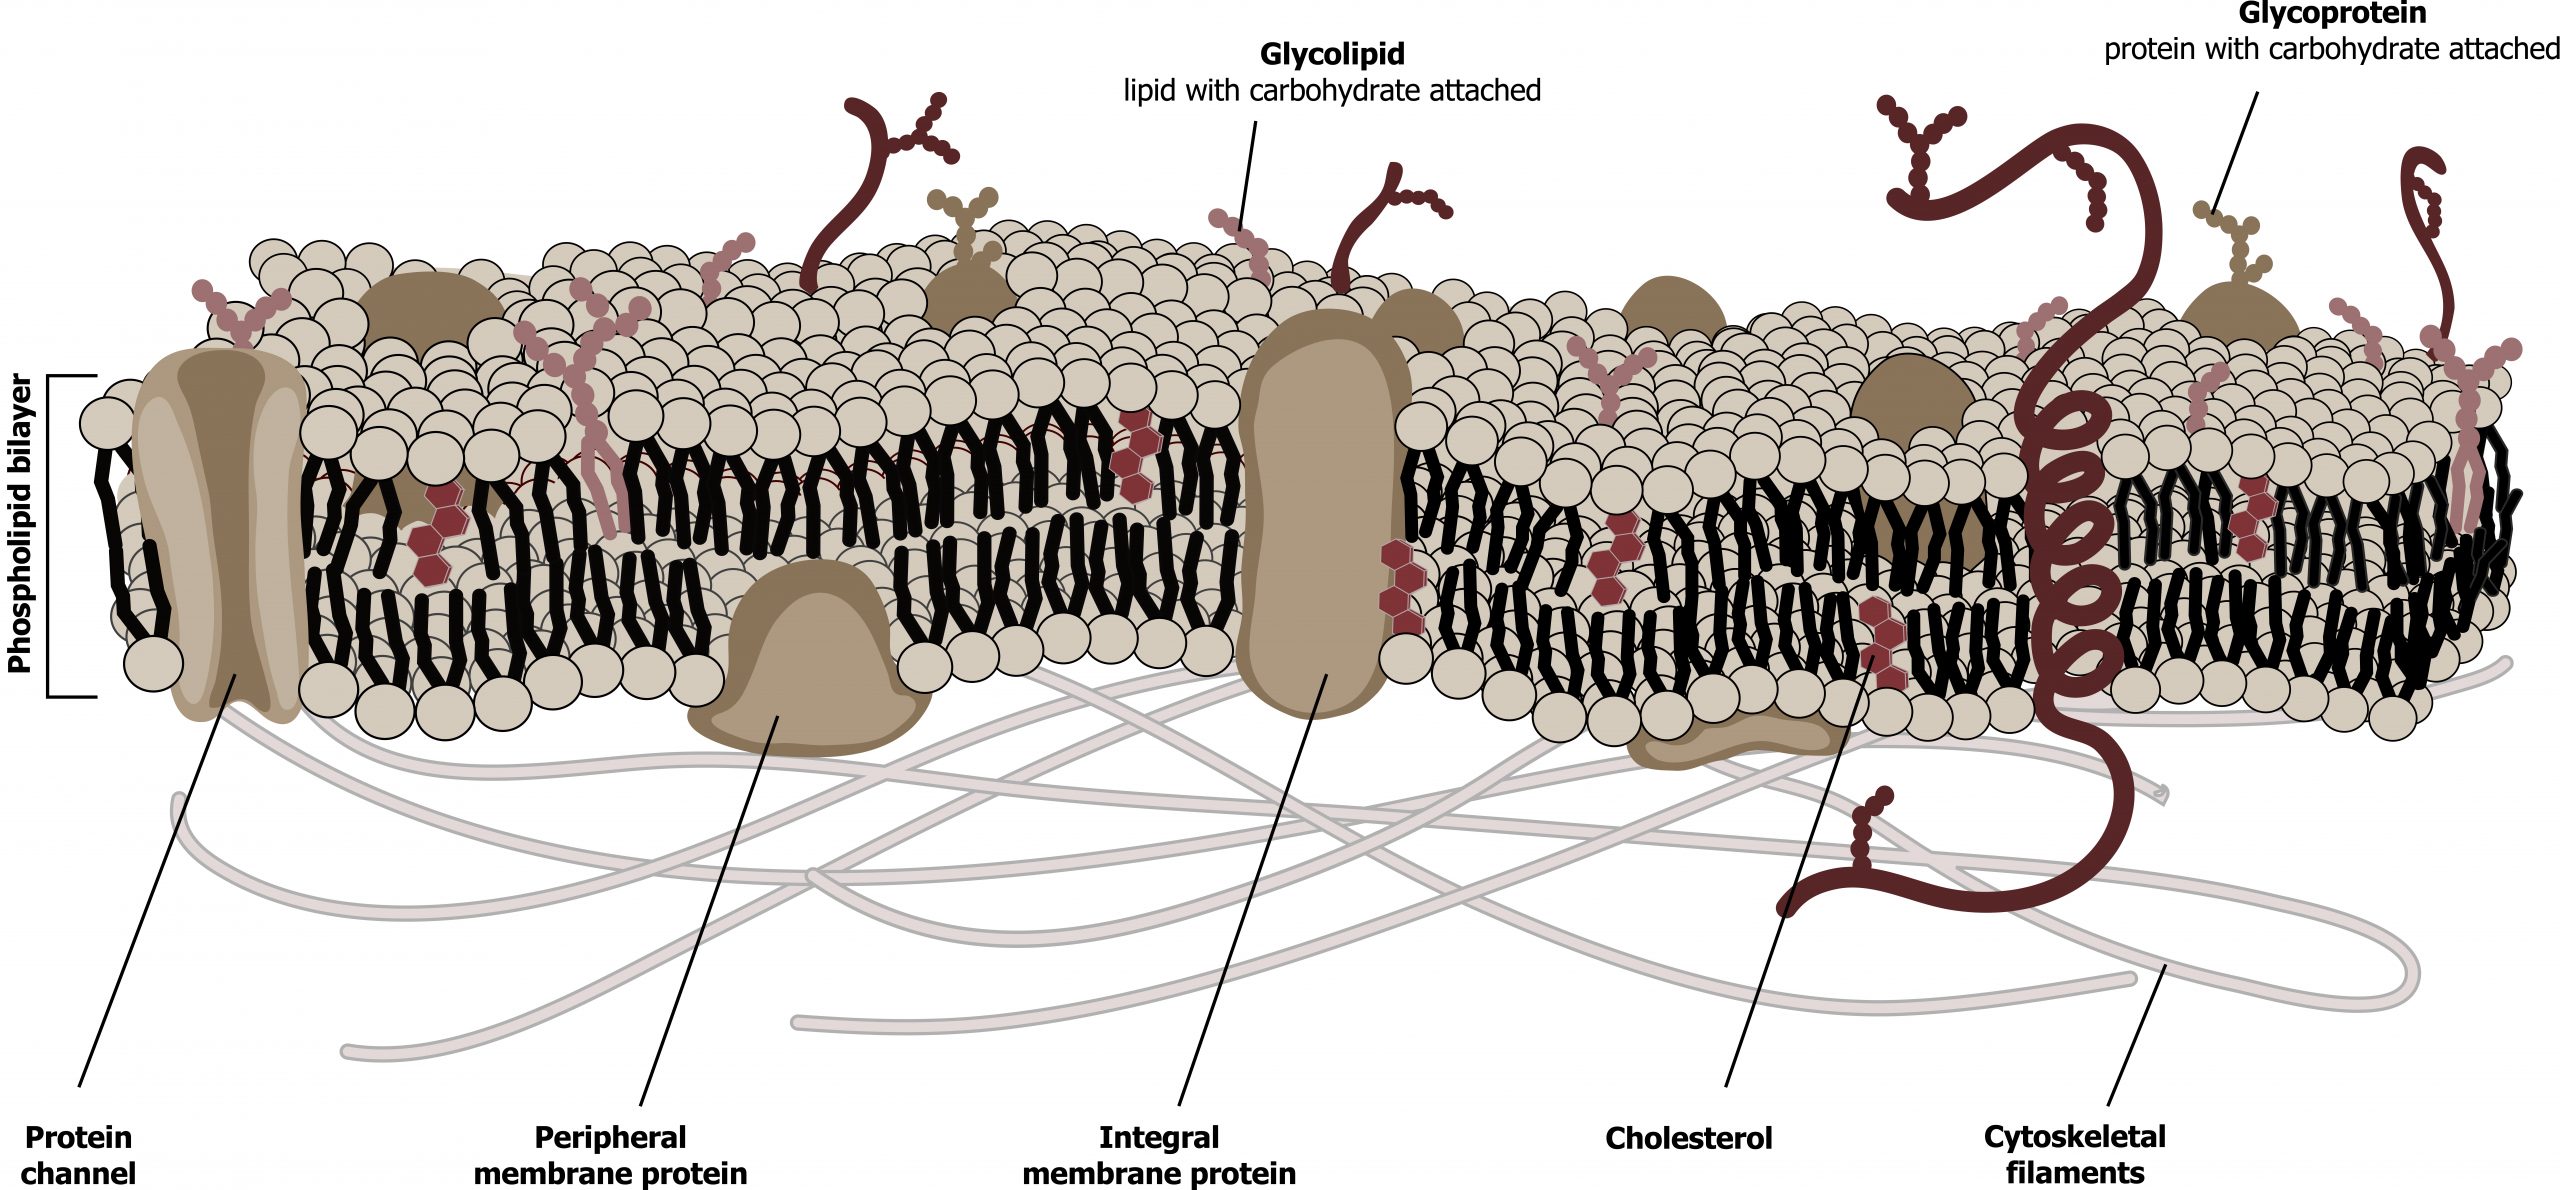 Plasma membrane is composed of the phospholipid bilayer with hydrophilic heads on the outside and hydrophobic tails on the inside. Cholesterol is bound between the phospholipids. Glycolipids, lipids with carbohydrates attached, and glycoproteins, proteins with carbohydrates attached, are bound to the extracellular side. Cytoskeletal filaments are bound to the intracellular side. There are transmembrane protein channels and integral membrane proteins and peripheral membrane proteins within the plasma membrane.